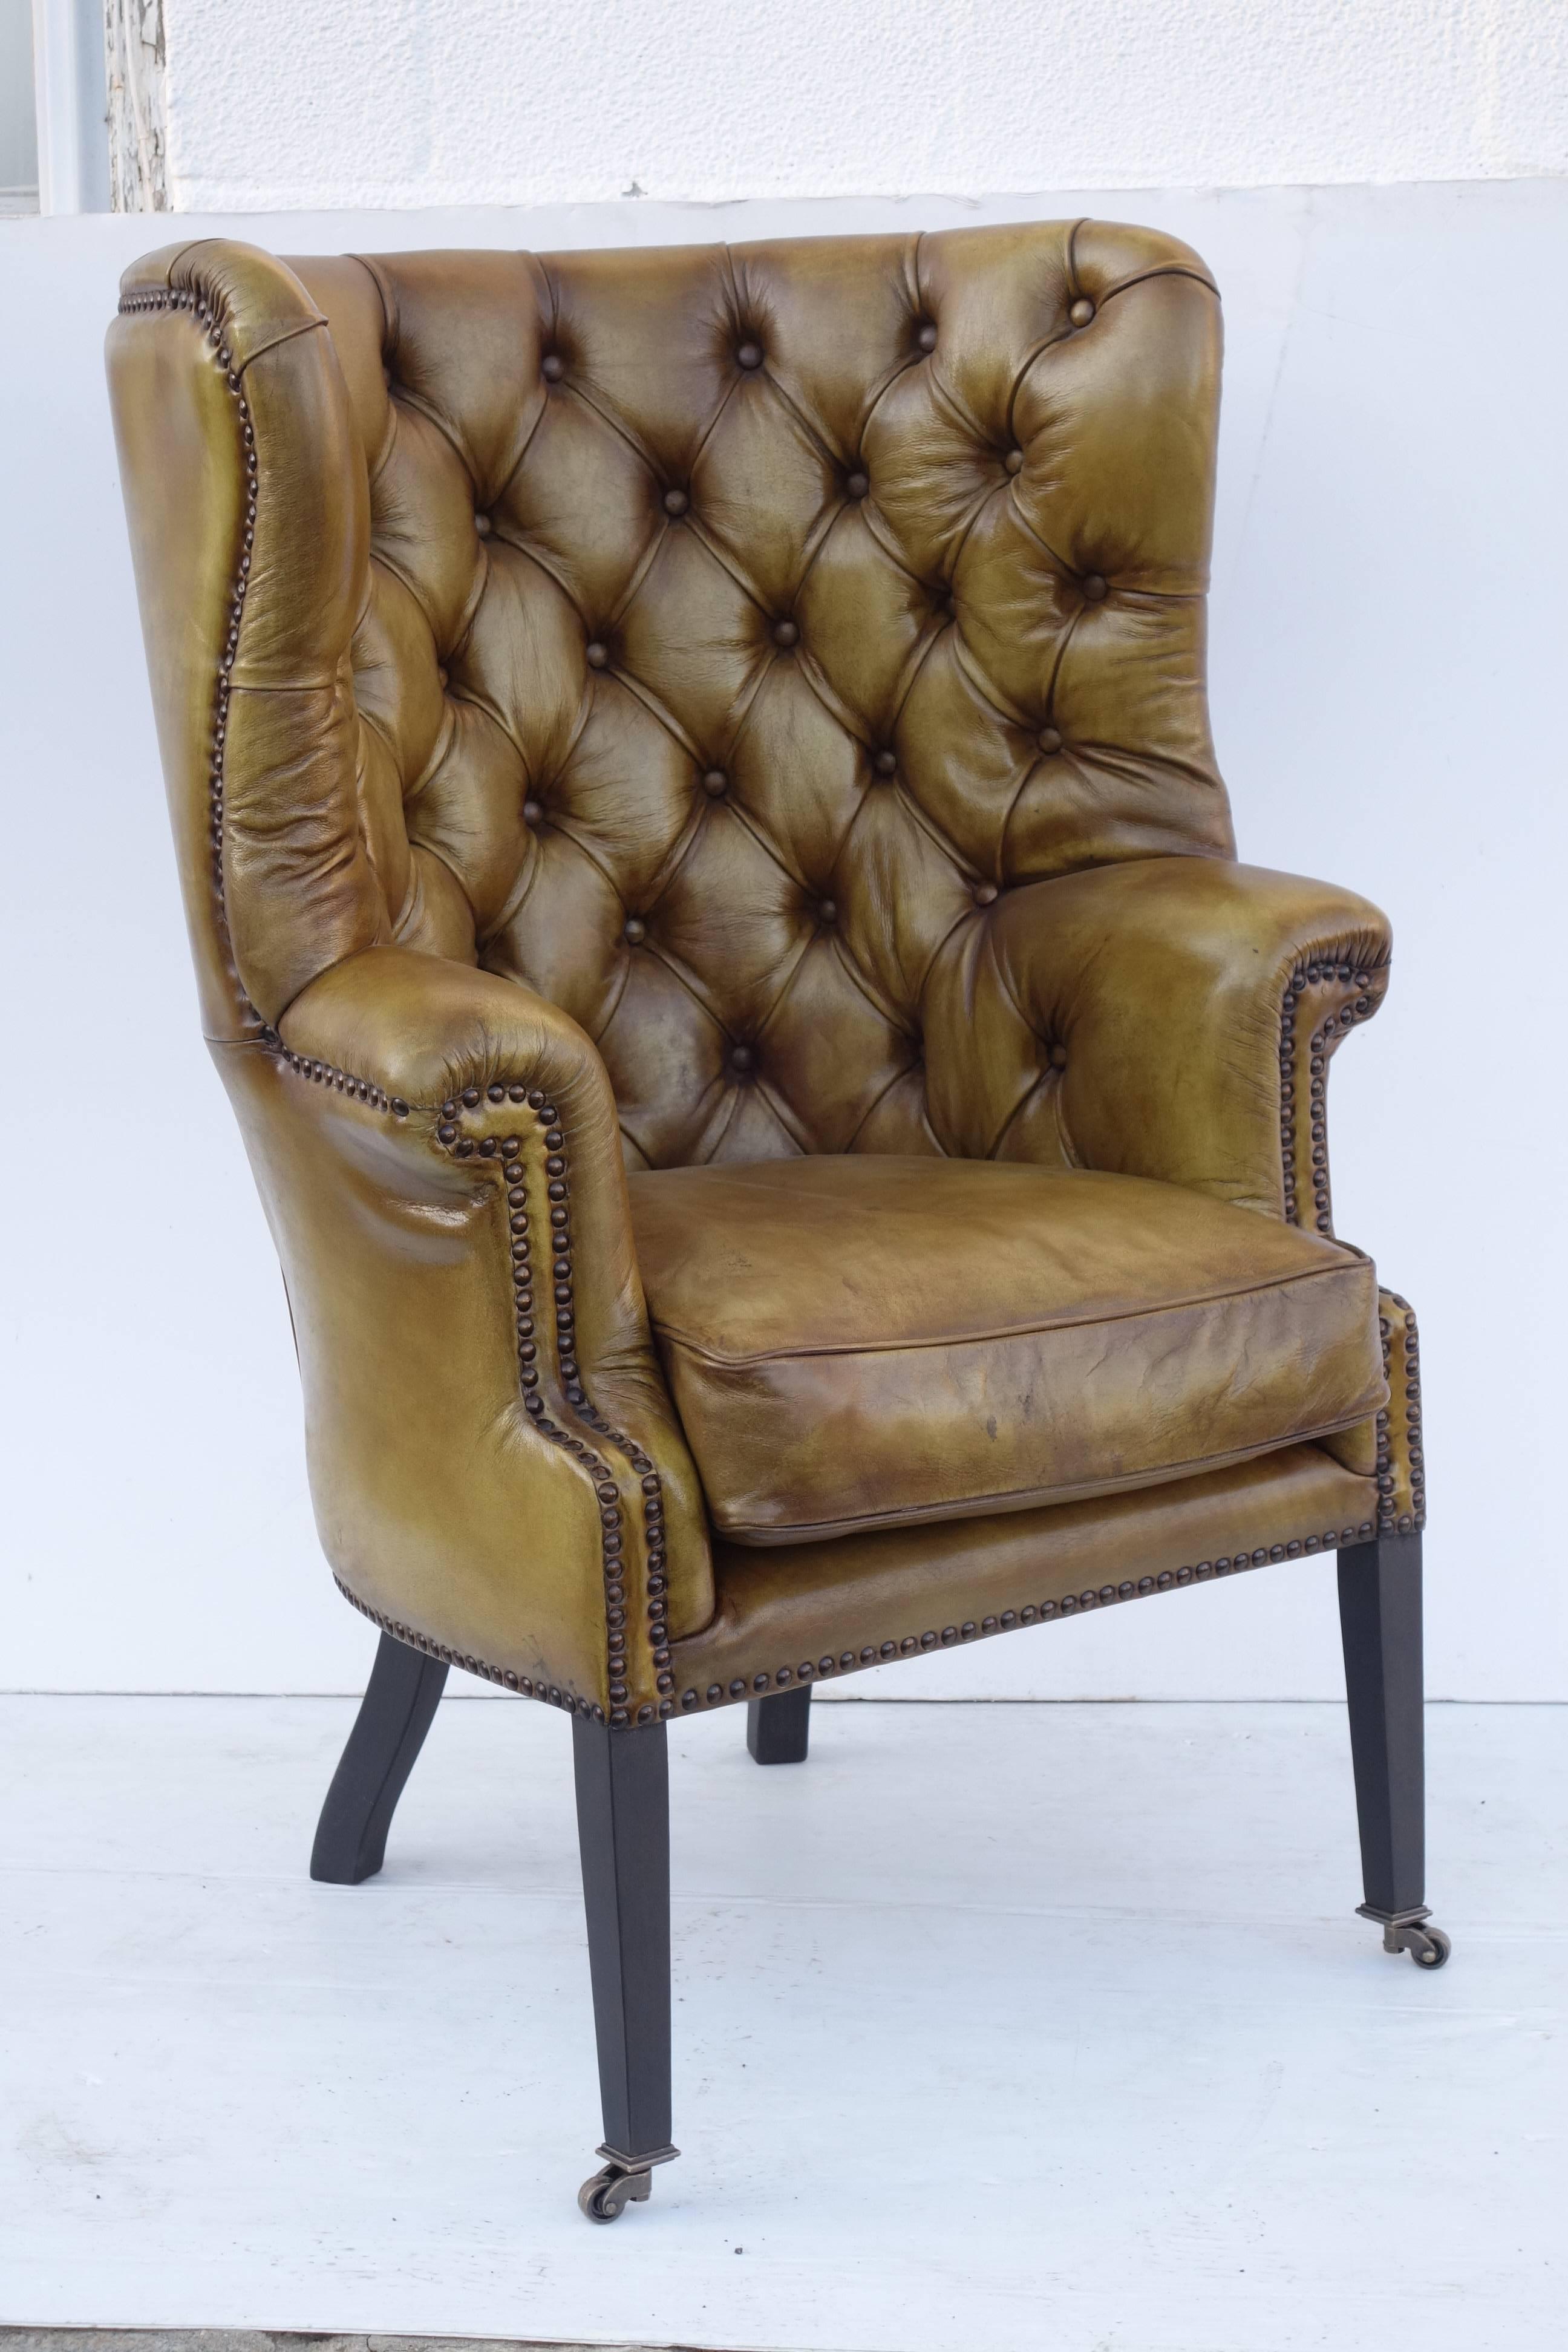 Upholstered Wing Chair in Vintage Green Leather In Excellent Condition For Sale In Bridgehampton, NY